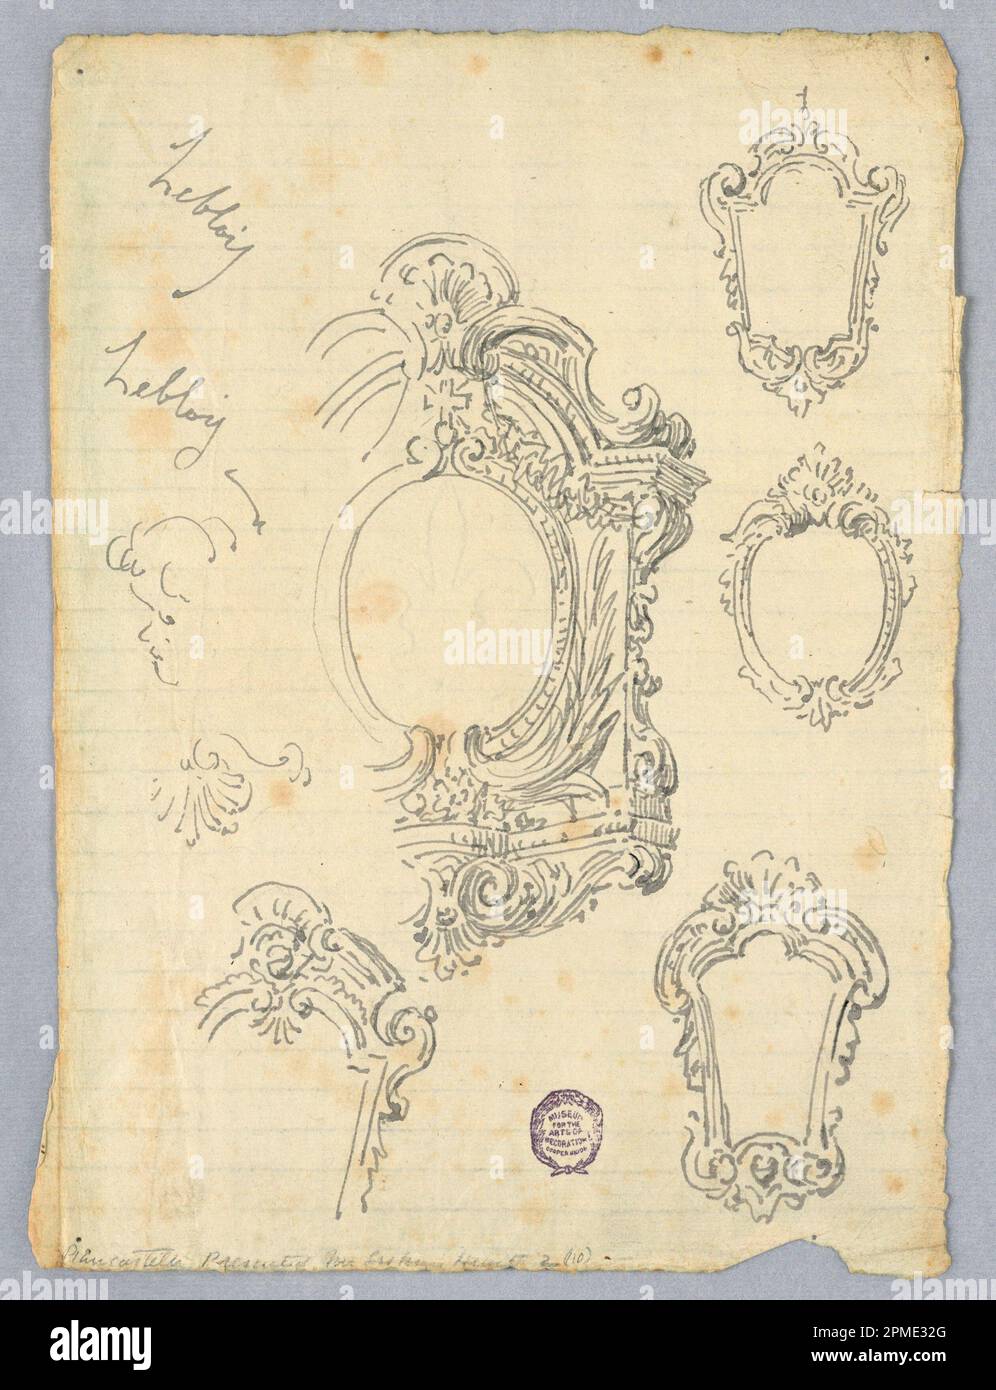 Drawing, Sketches for Frames; Designed by Leblois (Italian); Italy; brush and gray ink on light blue laid paper Stock Photo